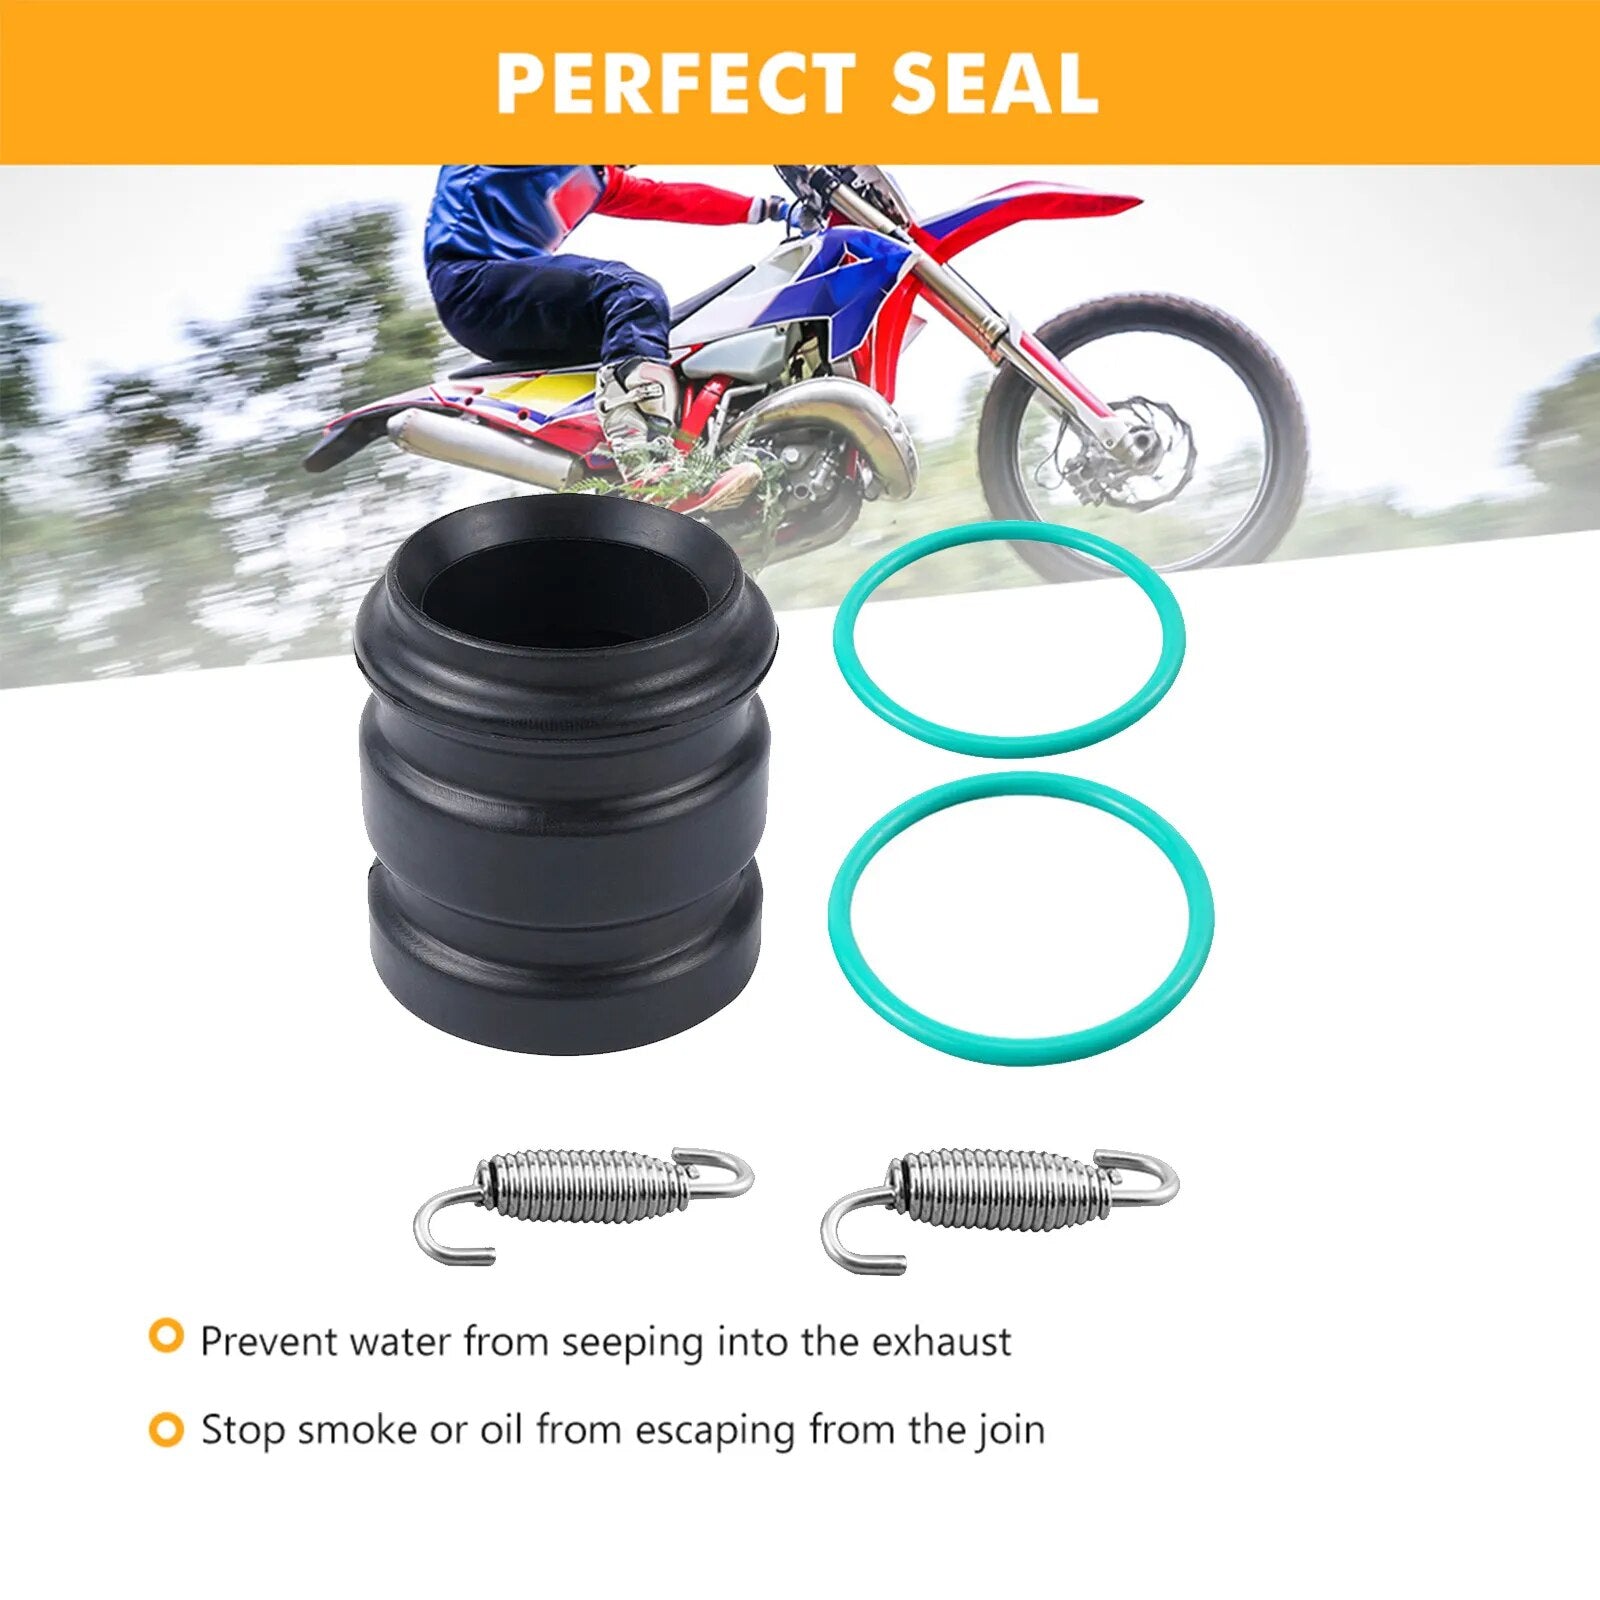 Motorcycle Exhaust Coupler Kit Muffler Tailpipe Rubber Seal For KTM 250 300 EXC MXC XCW XC SX 6D Freeride 1998-2016 50205057000